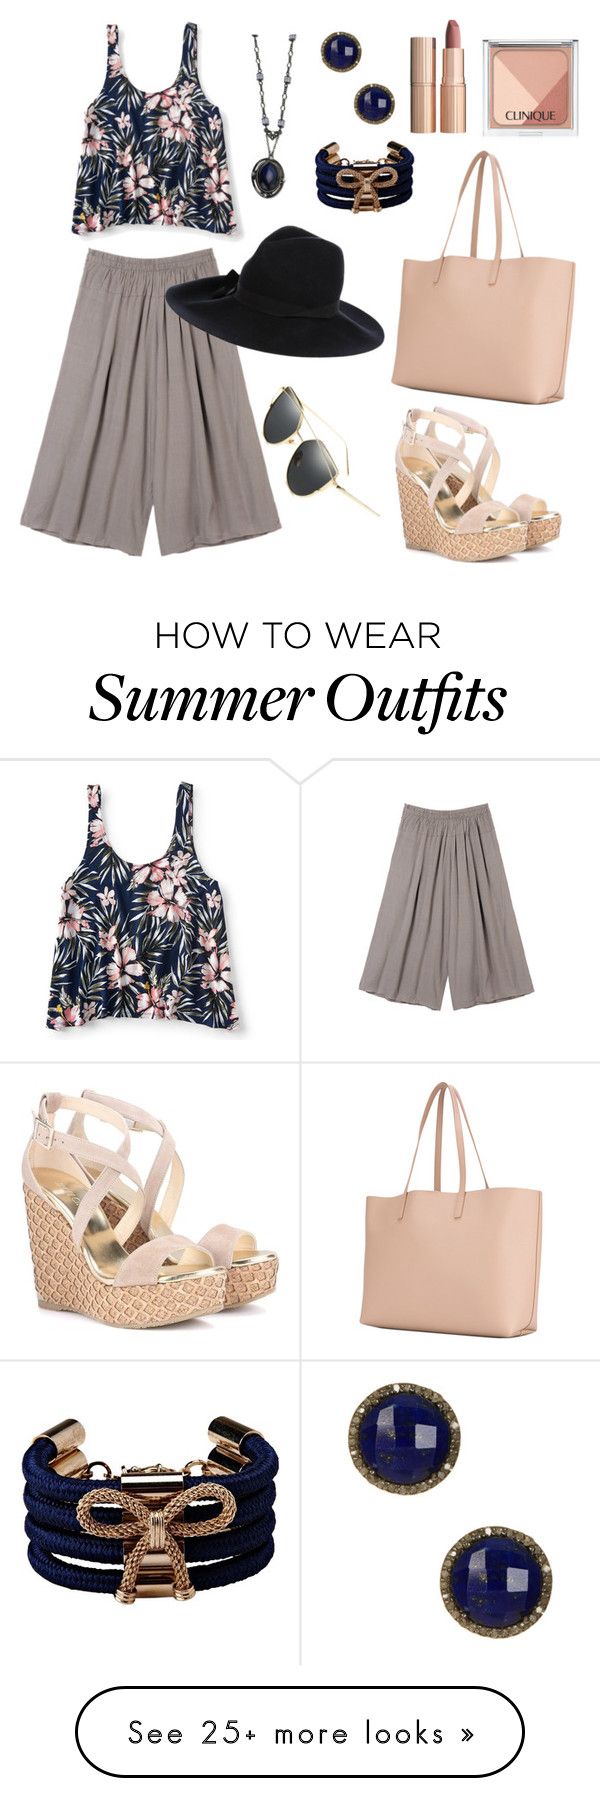 "casual summer outfit" by noviandri-ronal on Polyvore featuring AÃ©r...